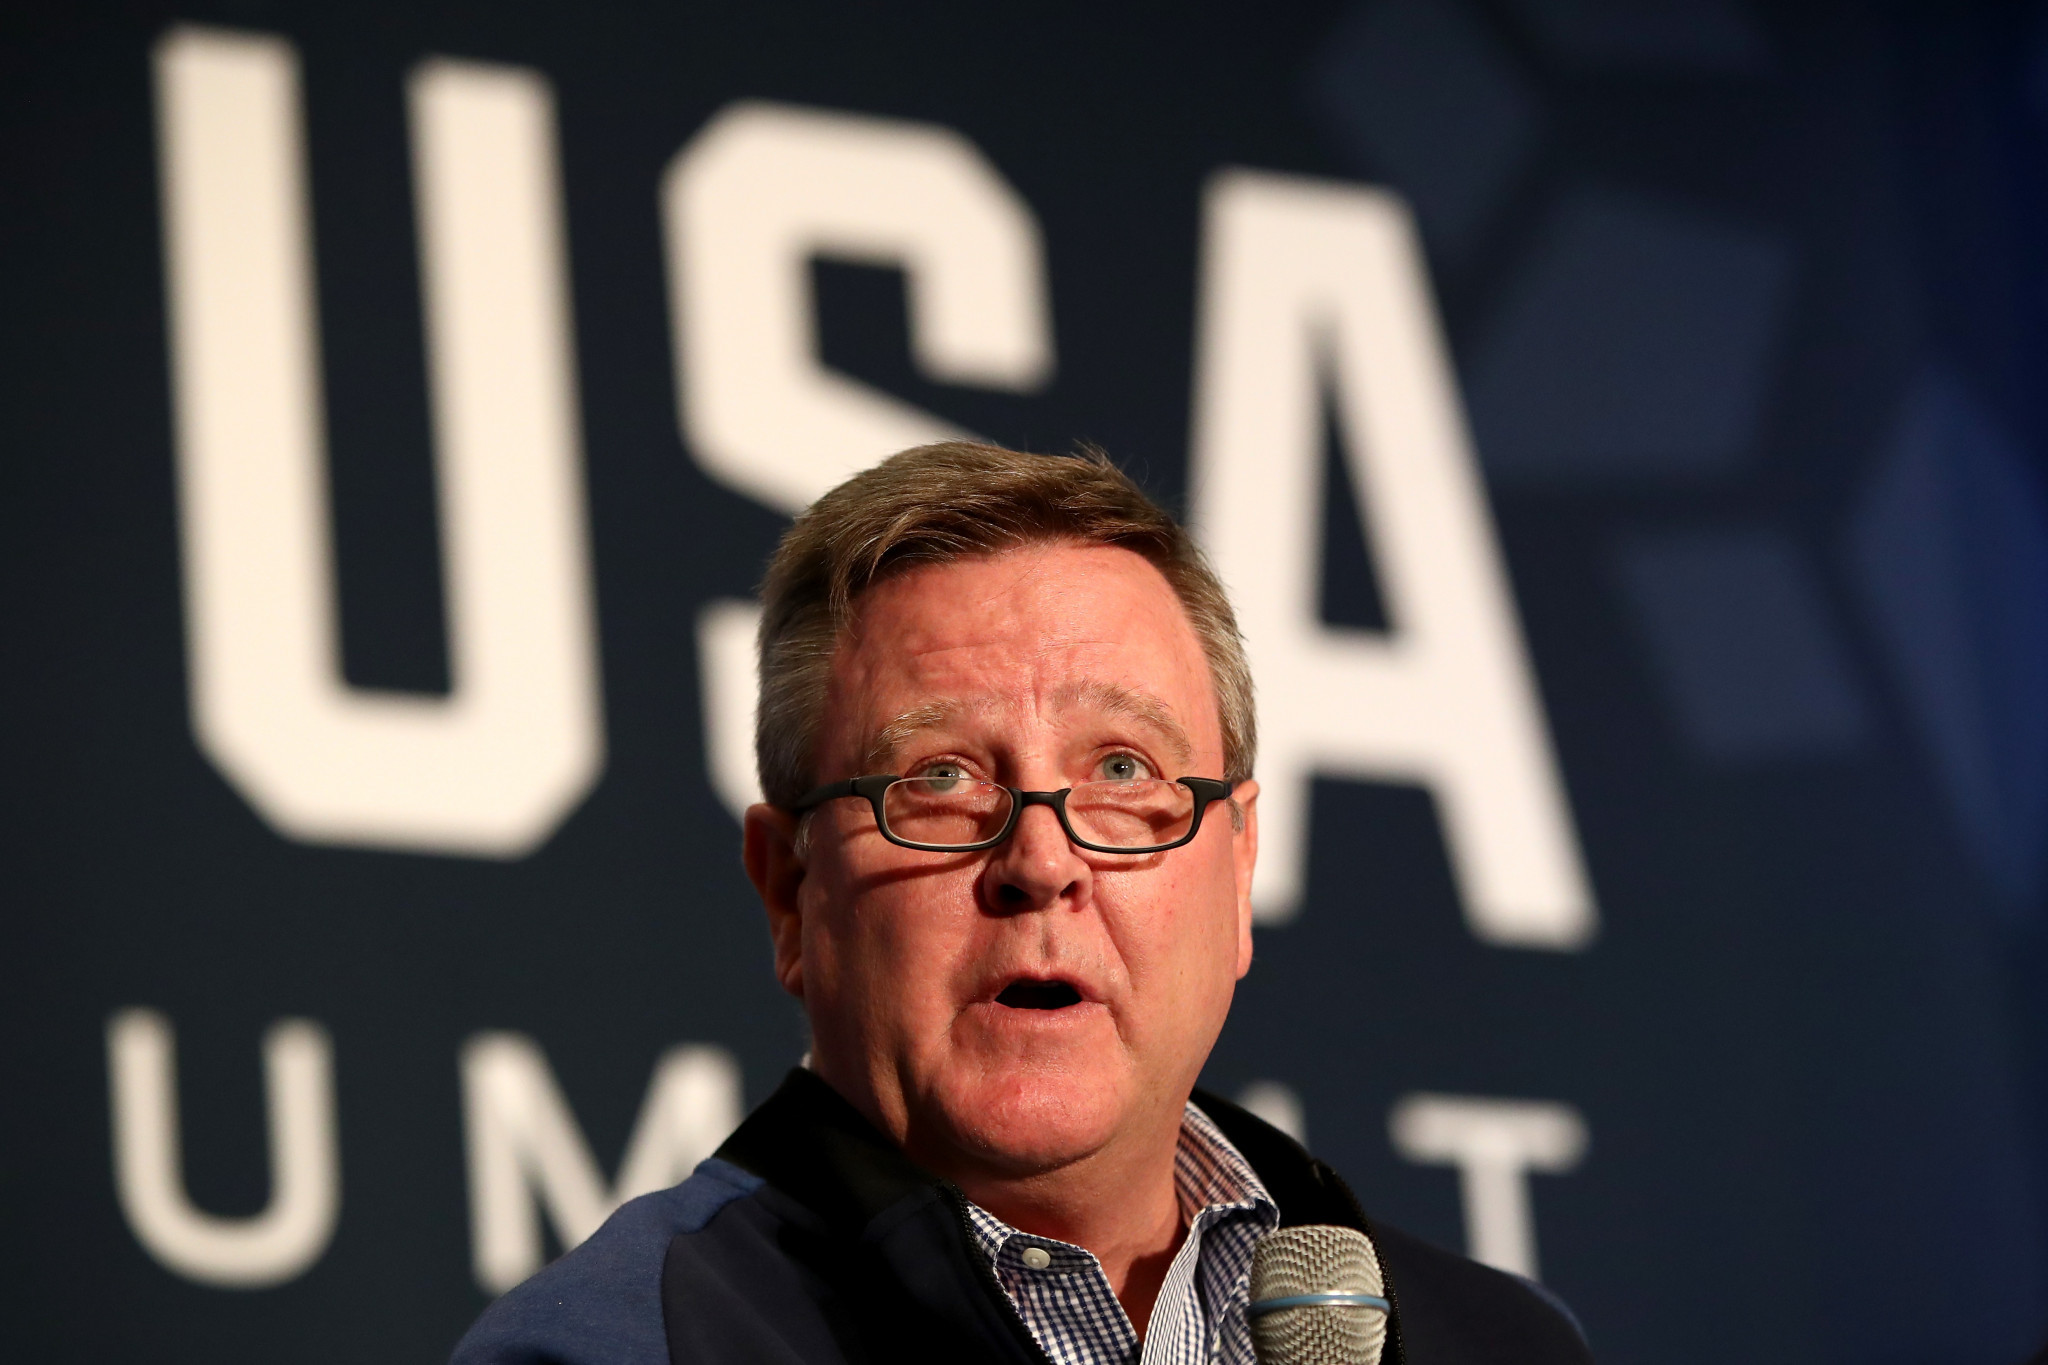 USOC demand resignation of full USA Gymnastics Board and threaten to decertify National Governing Body